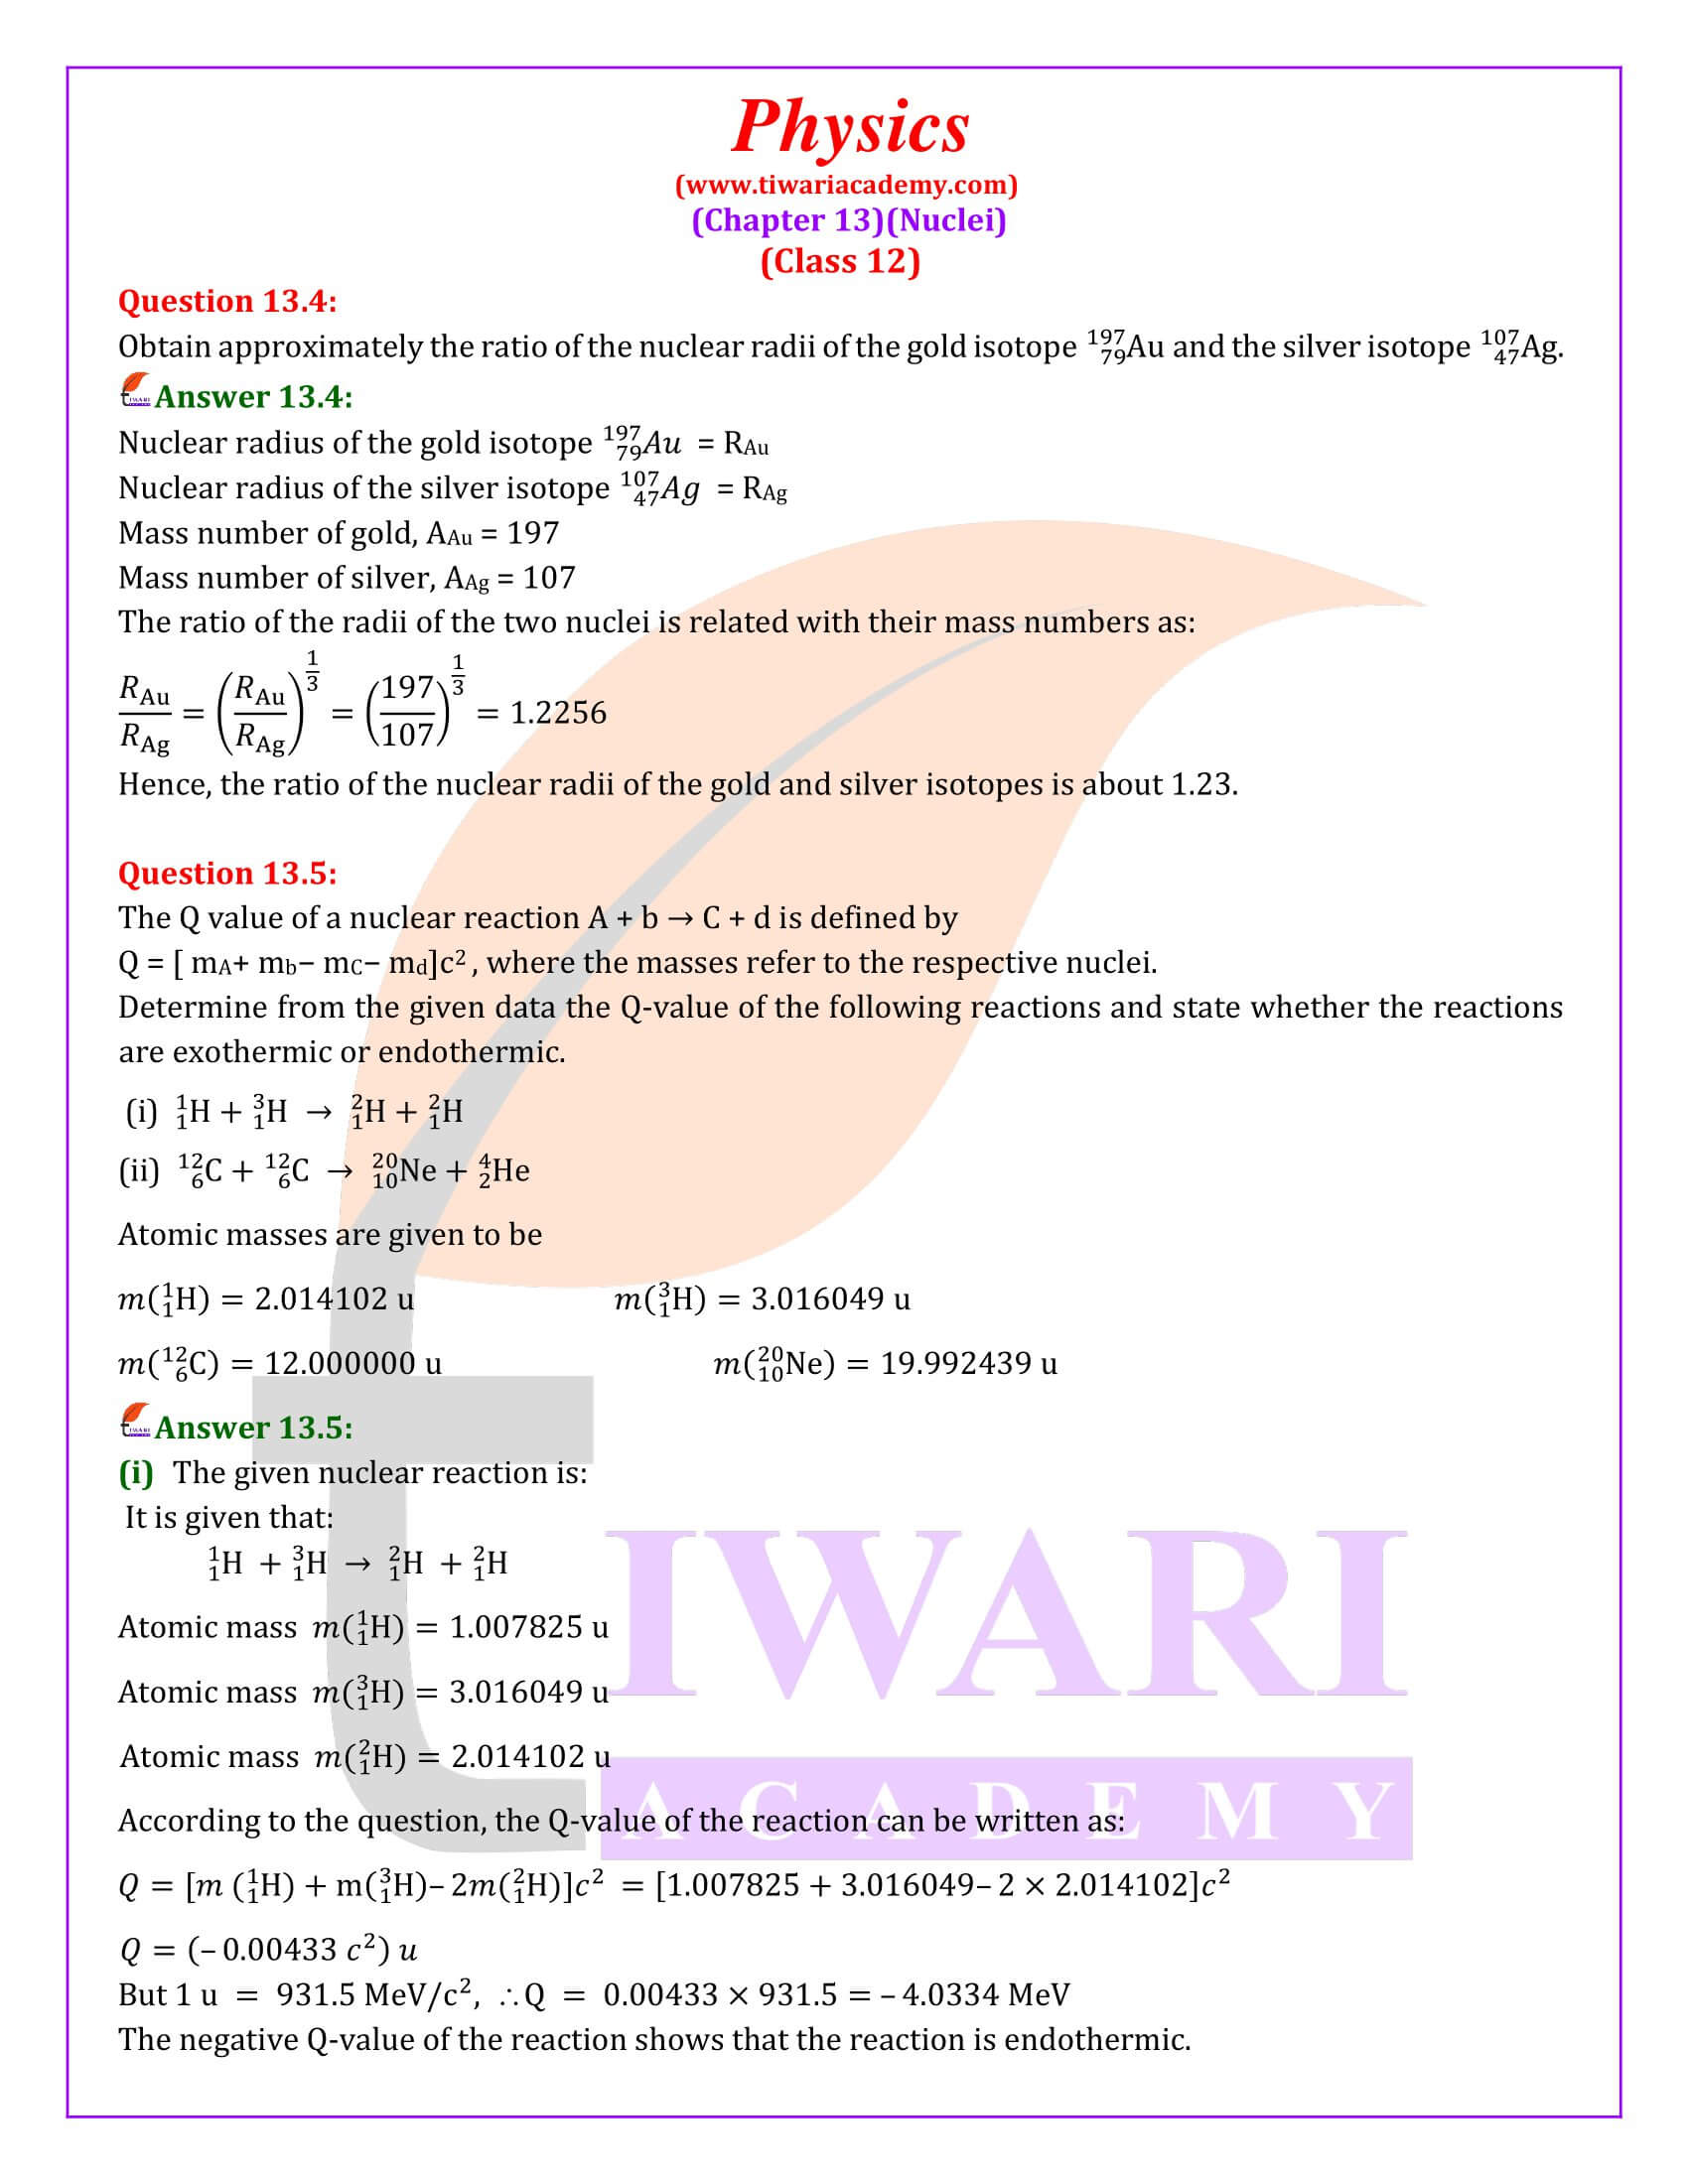 NCERT Solutions for Class 12 Physics Chapter 13 in English Medium